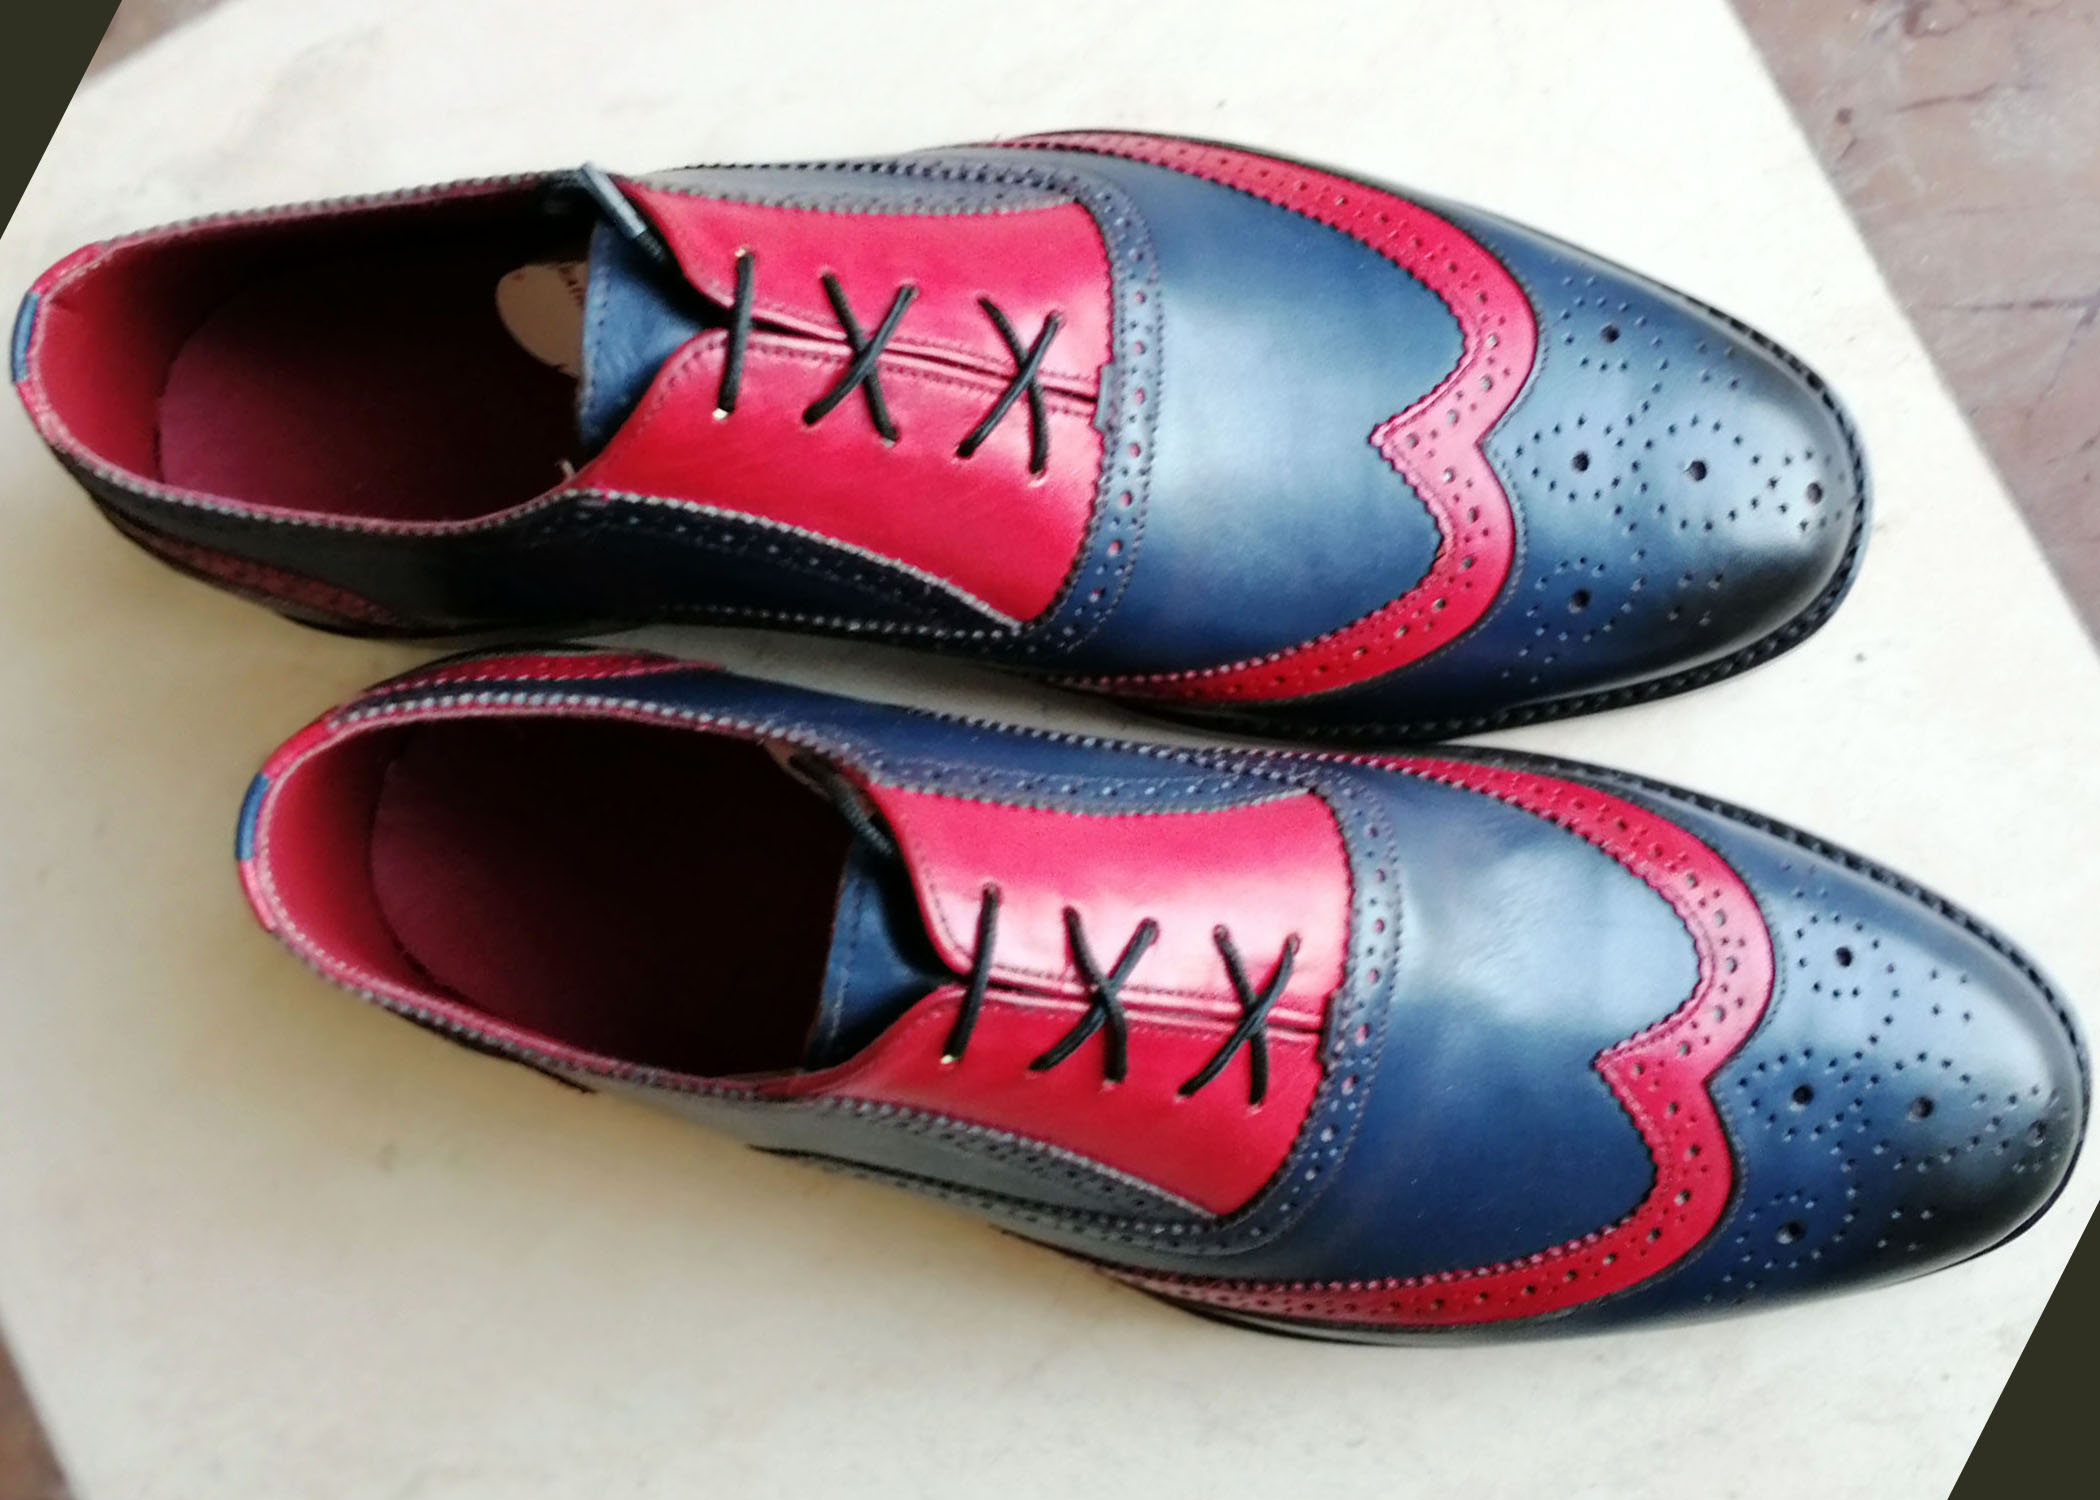 Bespoke Navy Blue Burgundy Wing Tip Brogue Lace Up Shoes